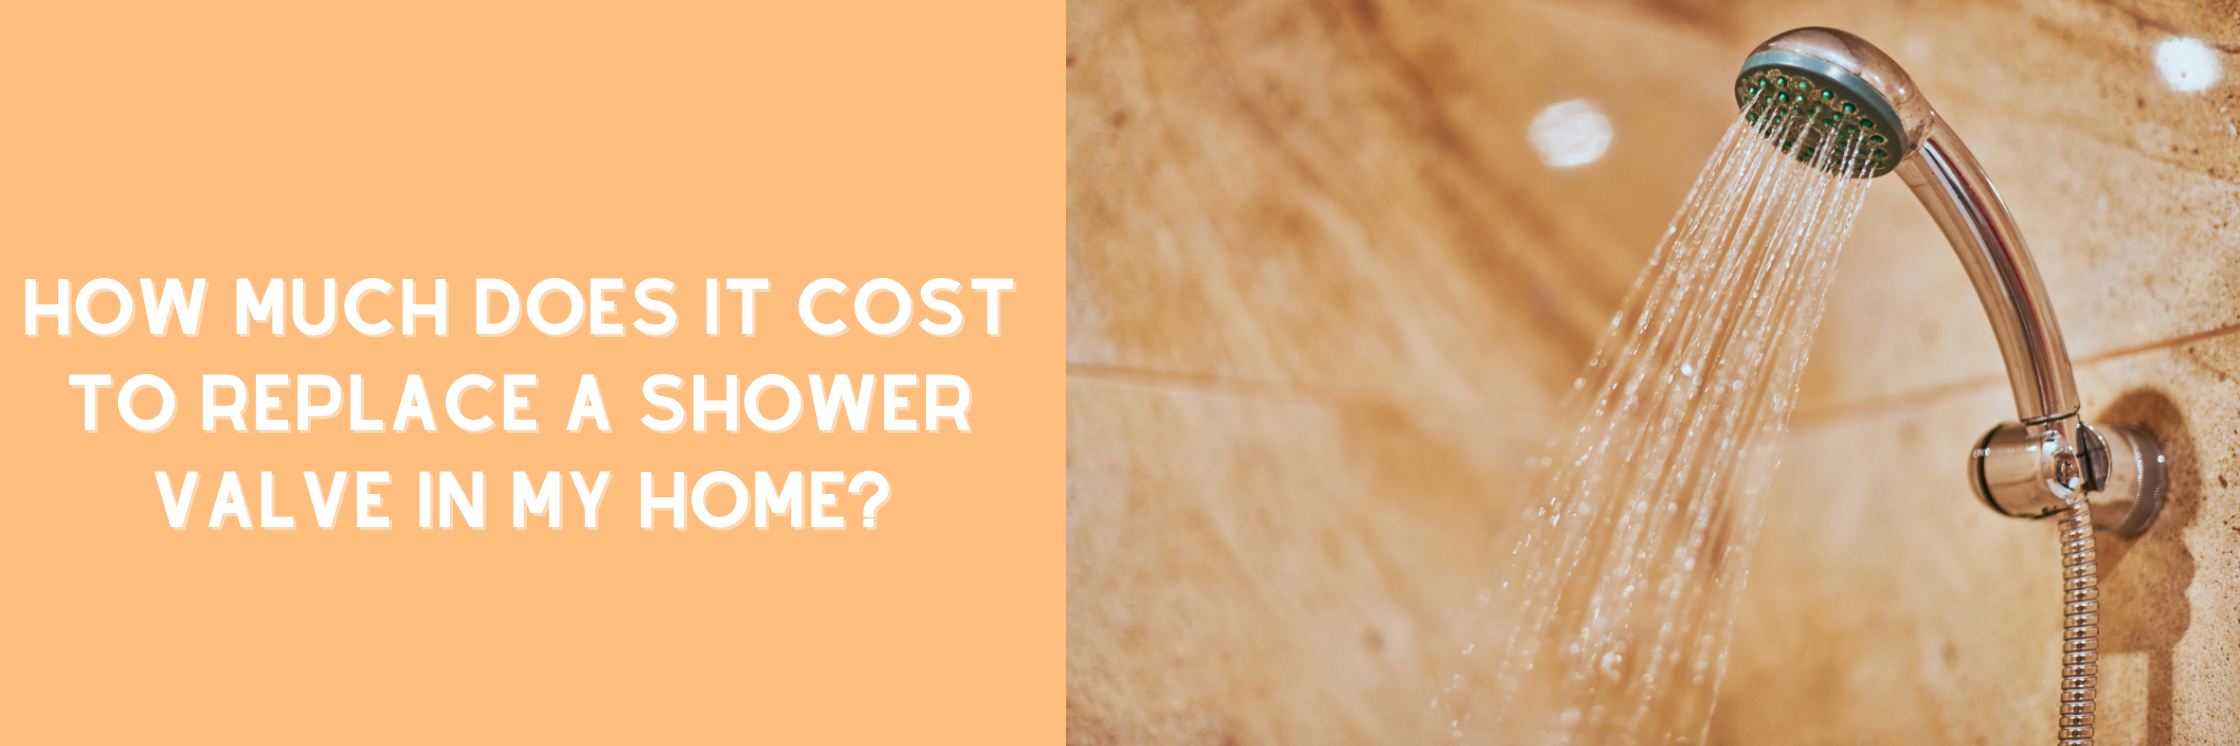 How Much Does It Cost to Replace a Shower Valve in My Home?